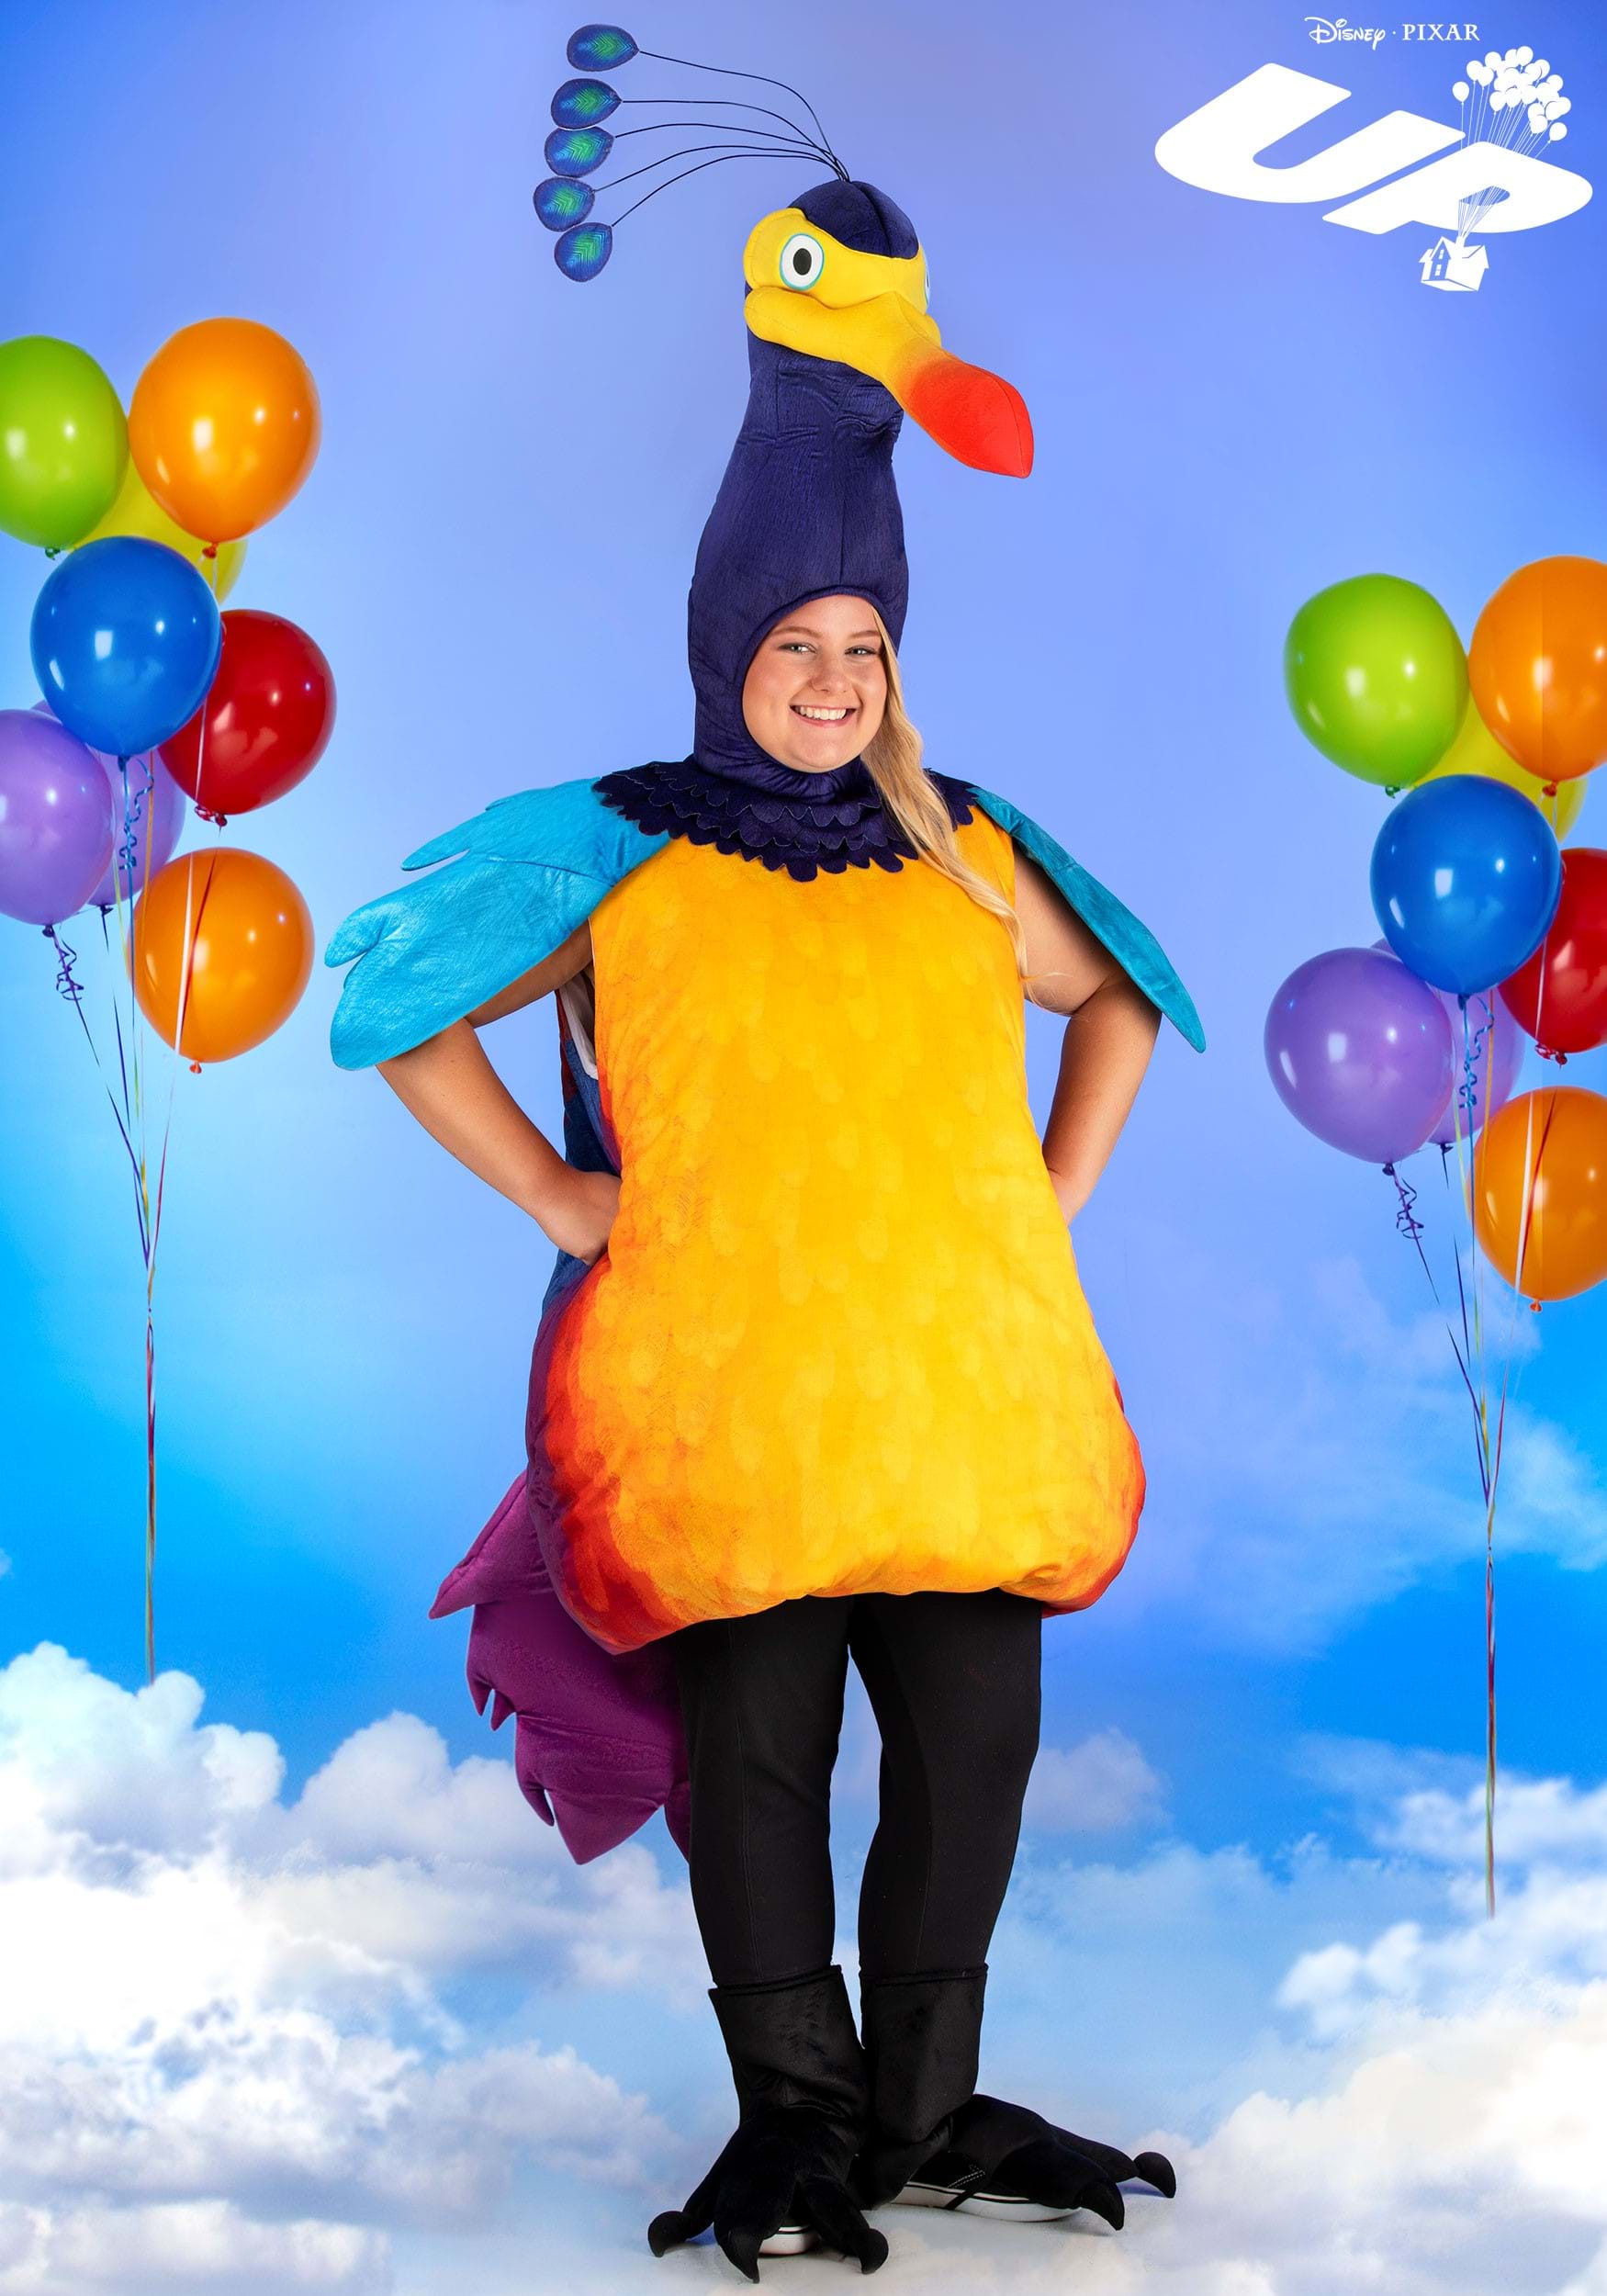 https://images.halloween.com/products/74440/1-1/adult-plus-size-disney-up-kevin-costume-upd-main.jpg